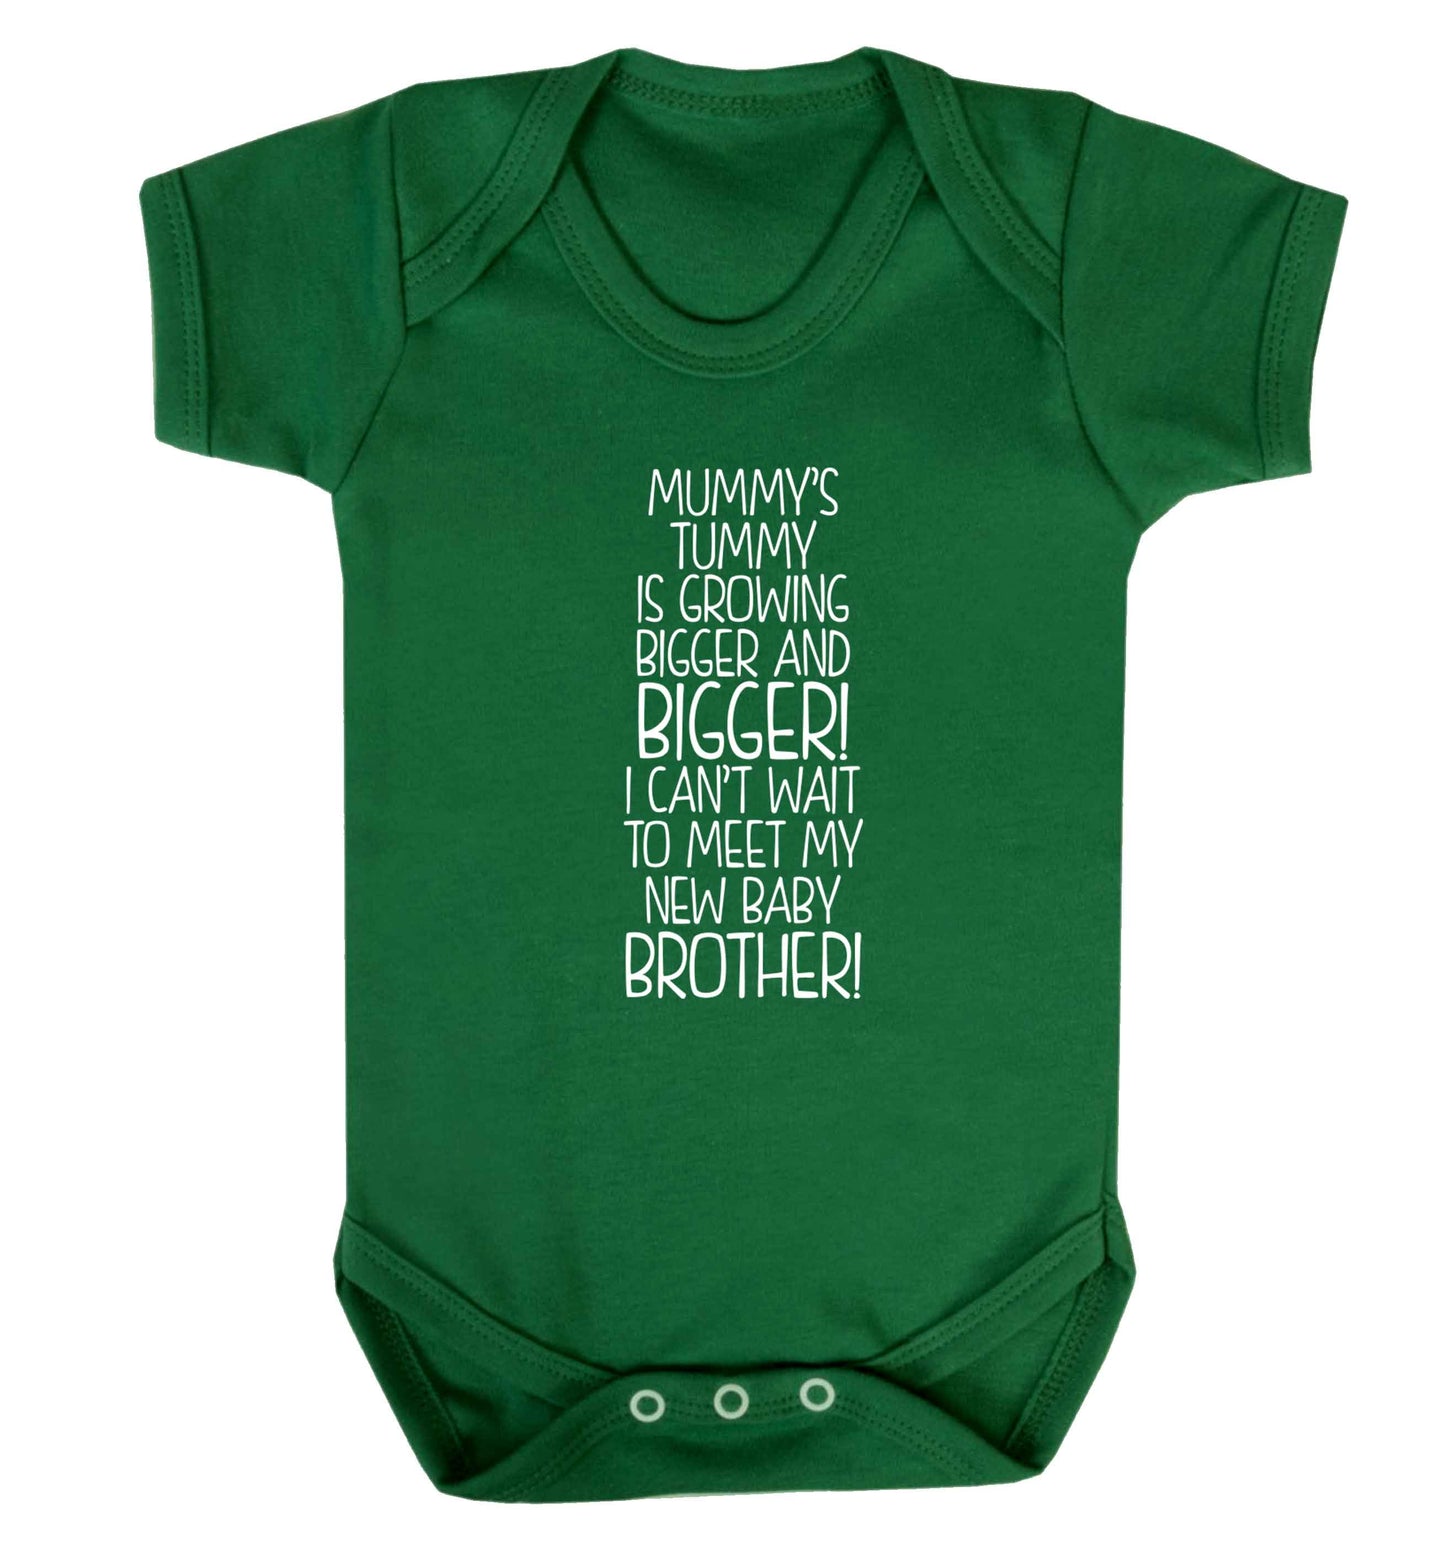 Mummy's tummy is growing bigger and bigger I can't wait to meet my new baby brother! Baby Vest green 18-24 months